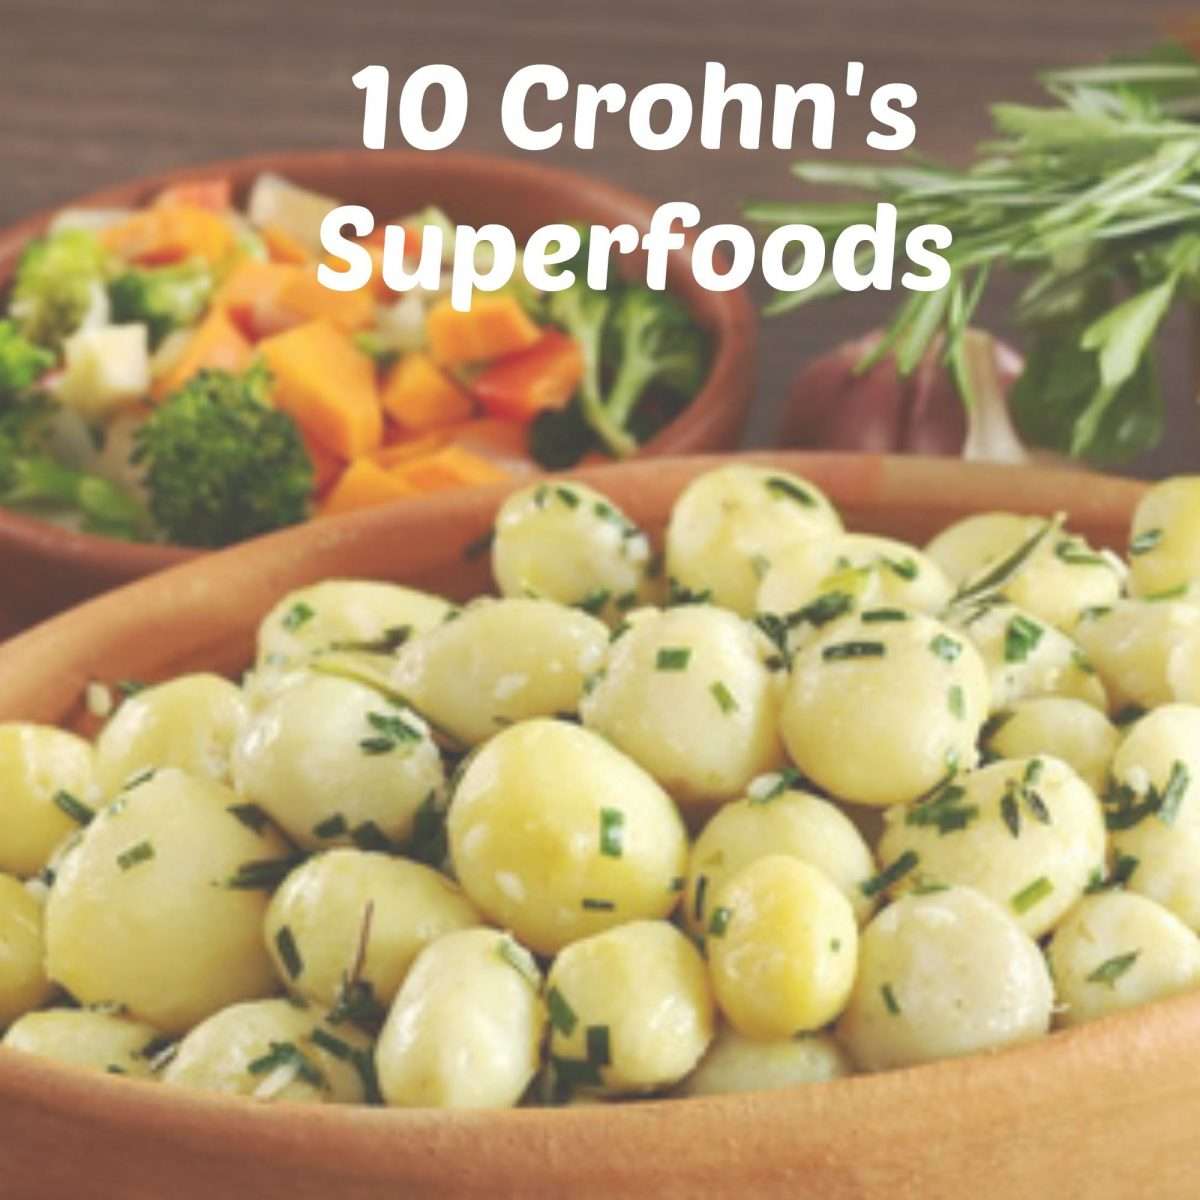 7 Foods to Eat During a Crohns Flare